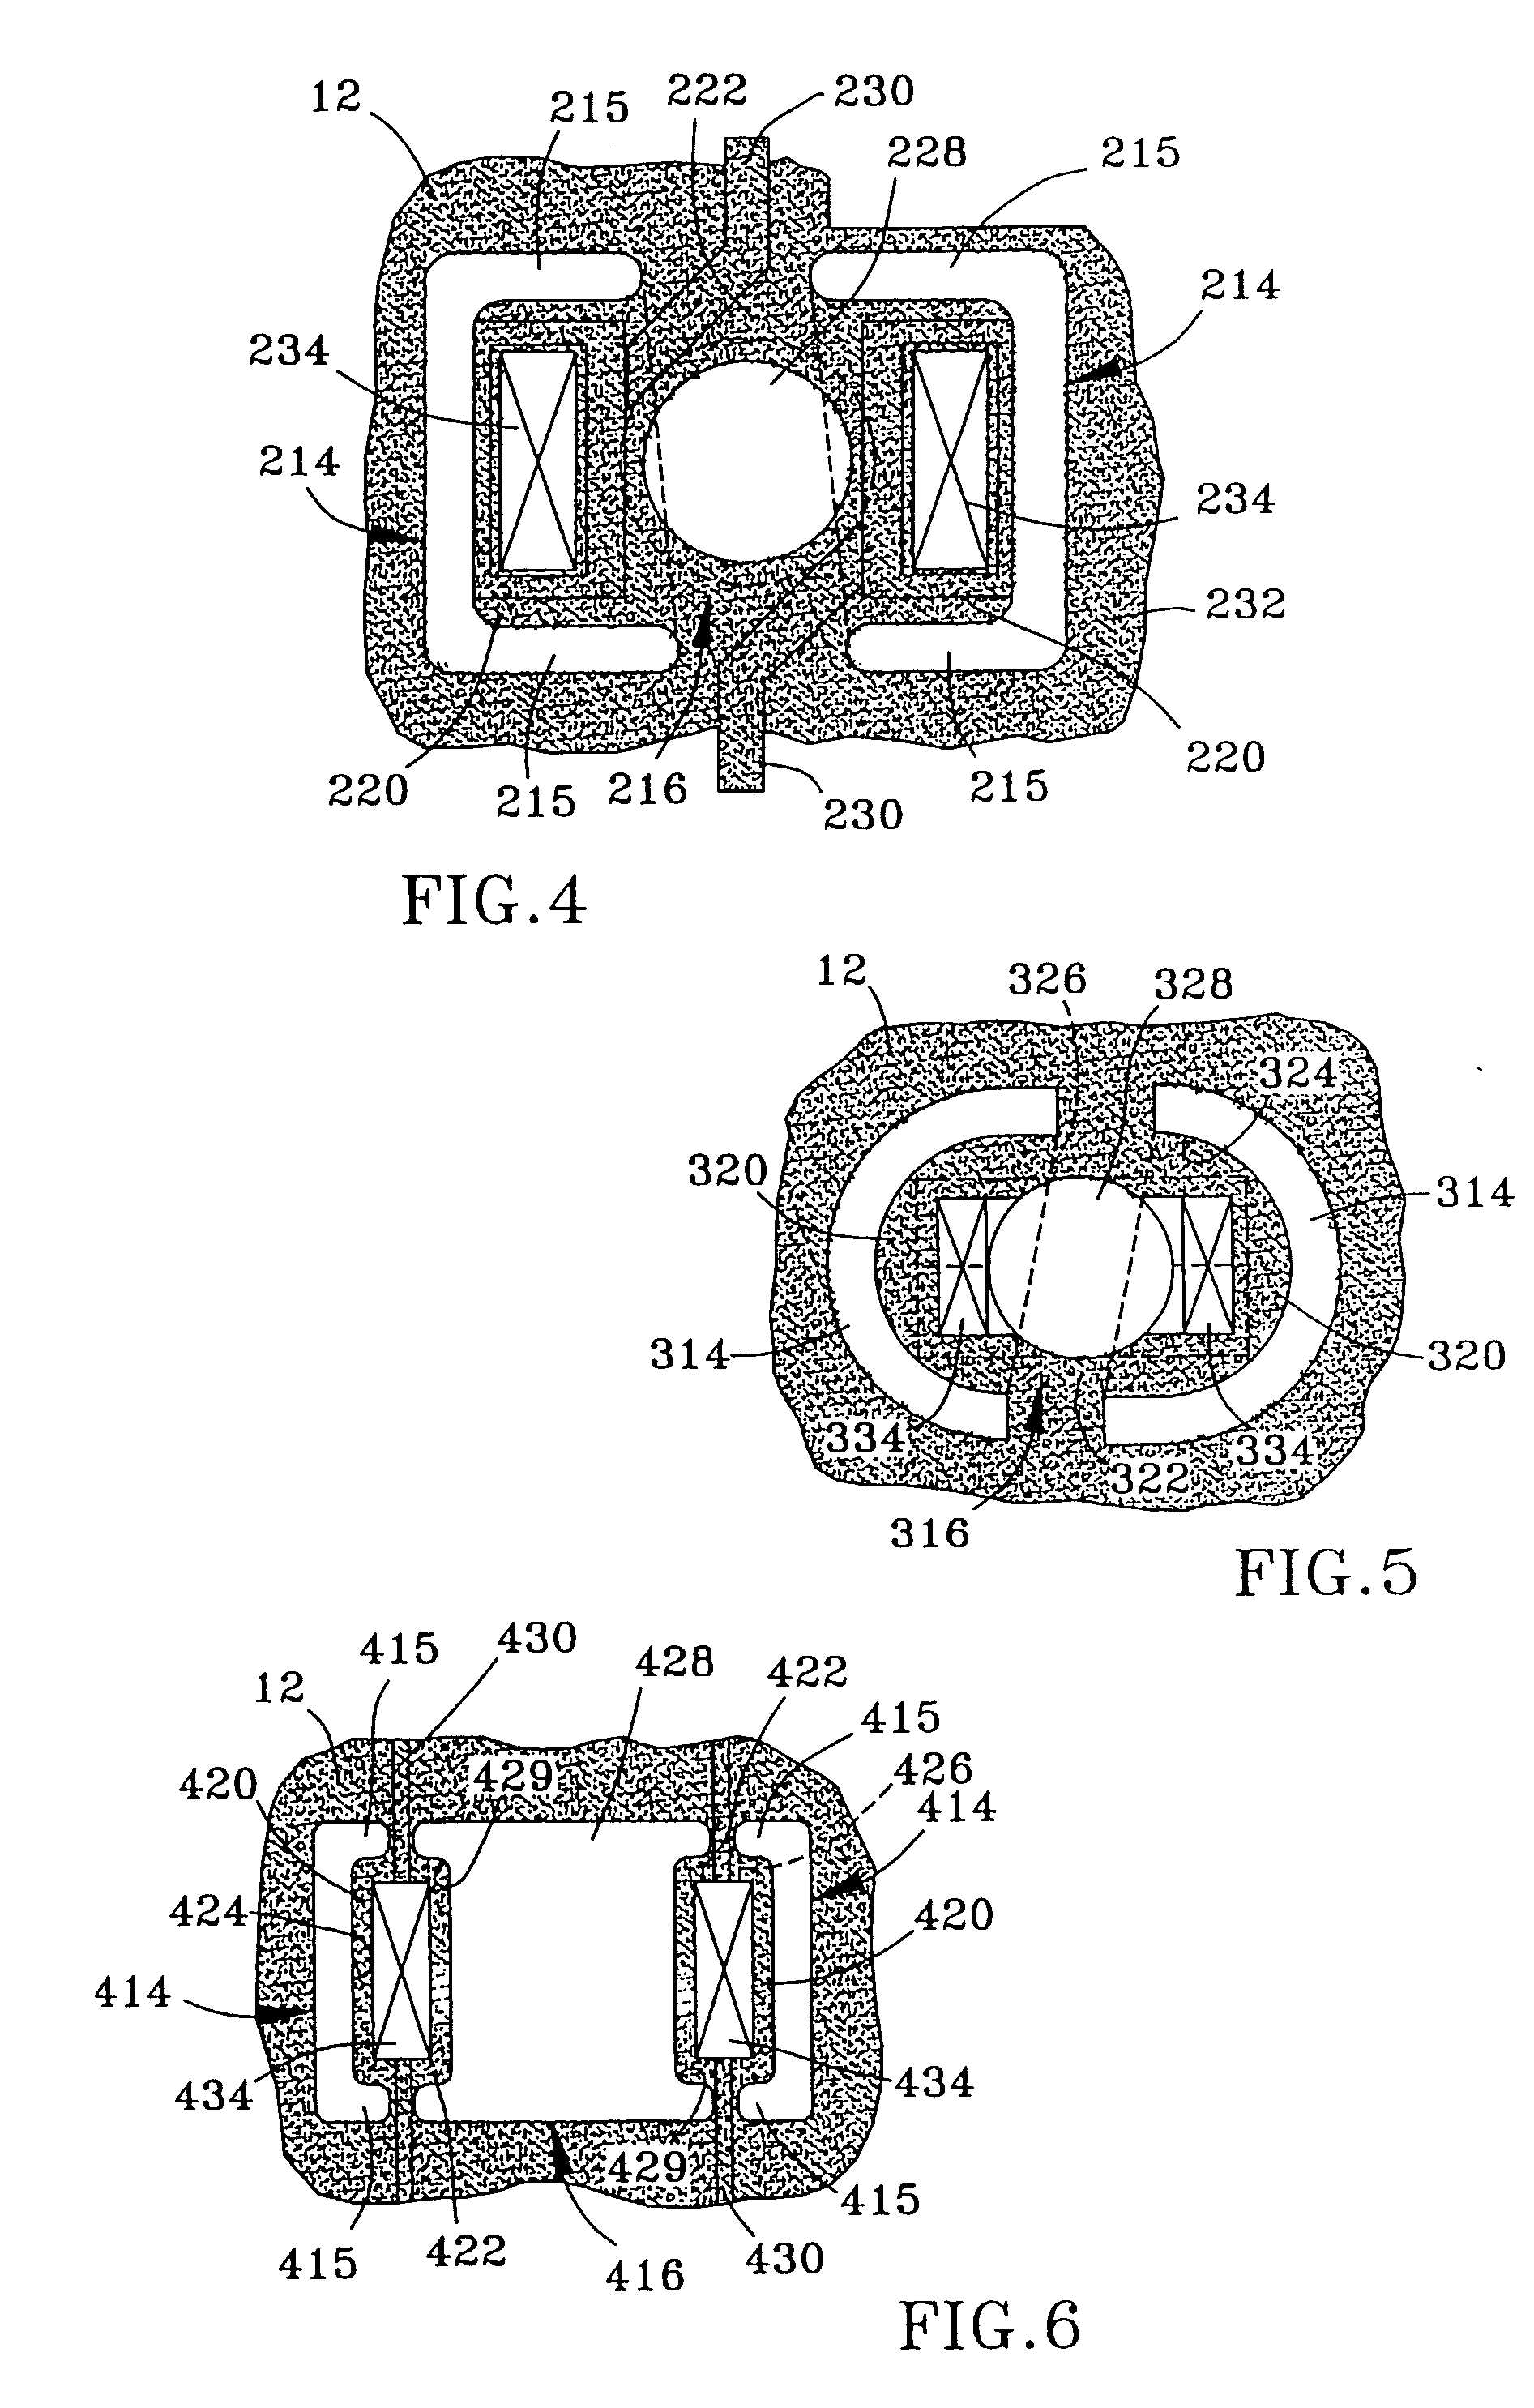 Circuit assembly having compliant substrate structures for mounting circuit devices